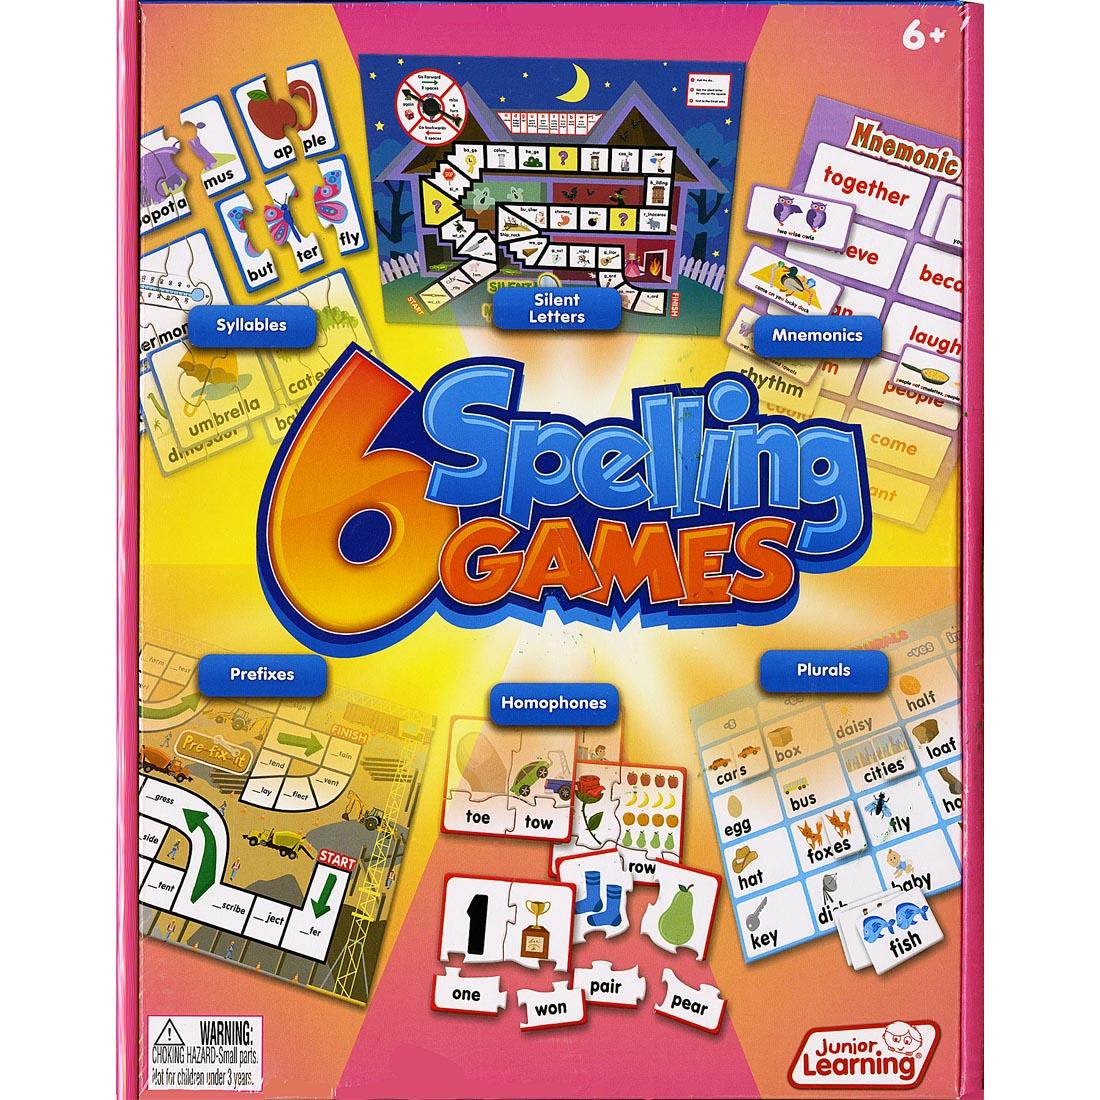 6 Spelling Games by Junior Learning